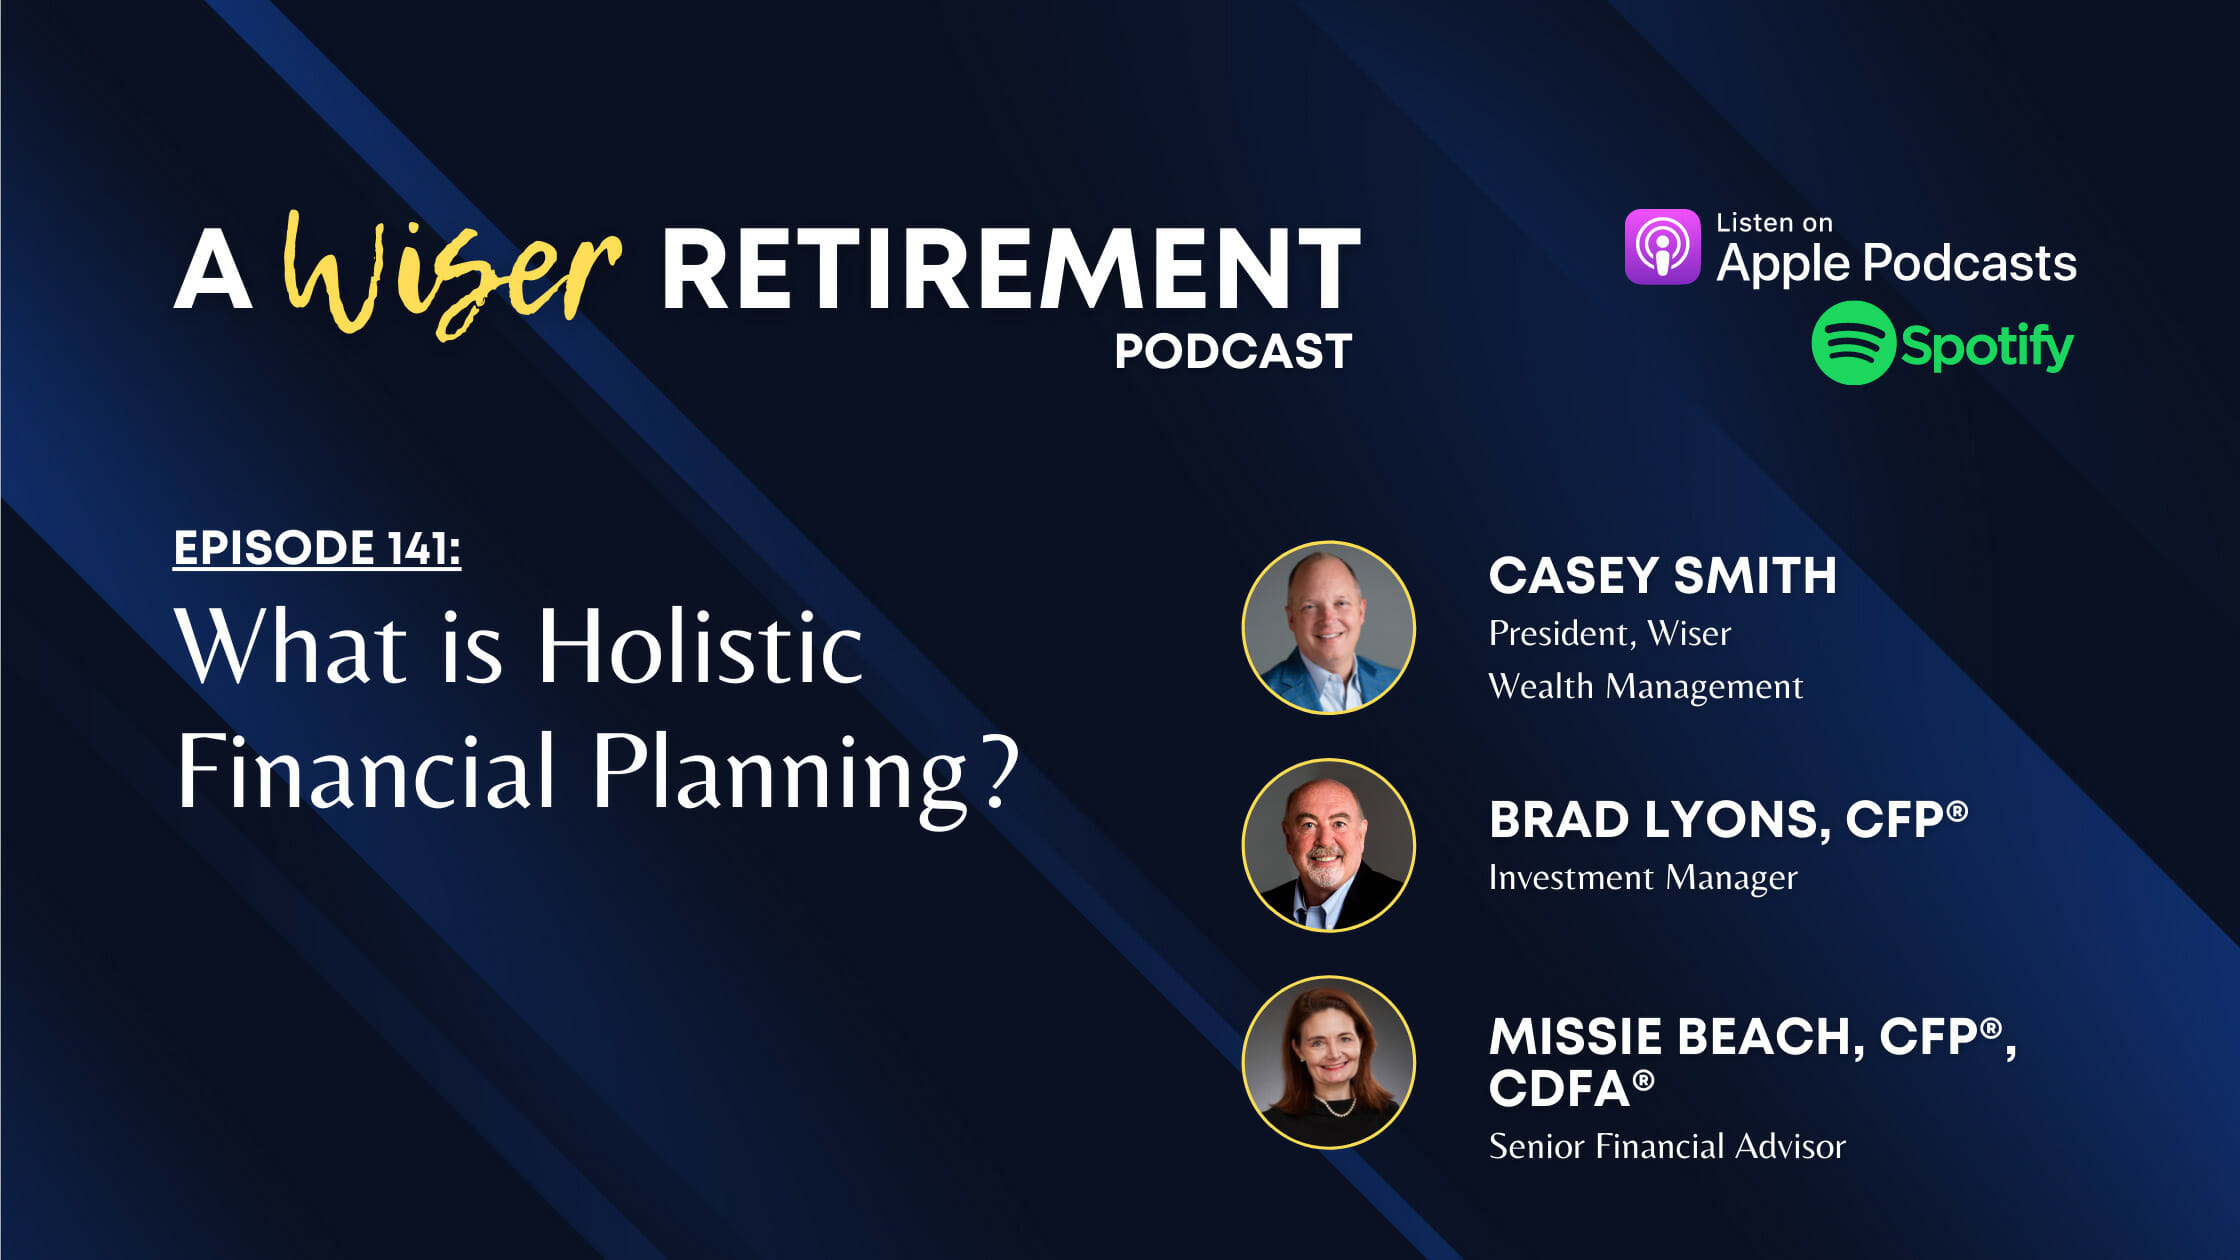 What is holistic financial planning?